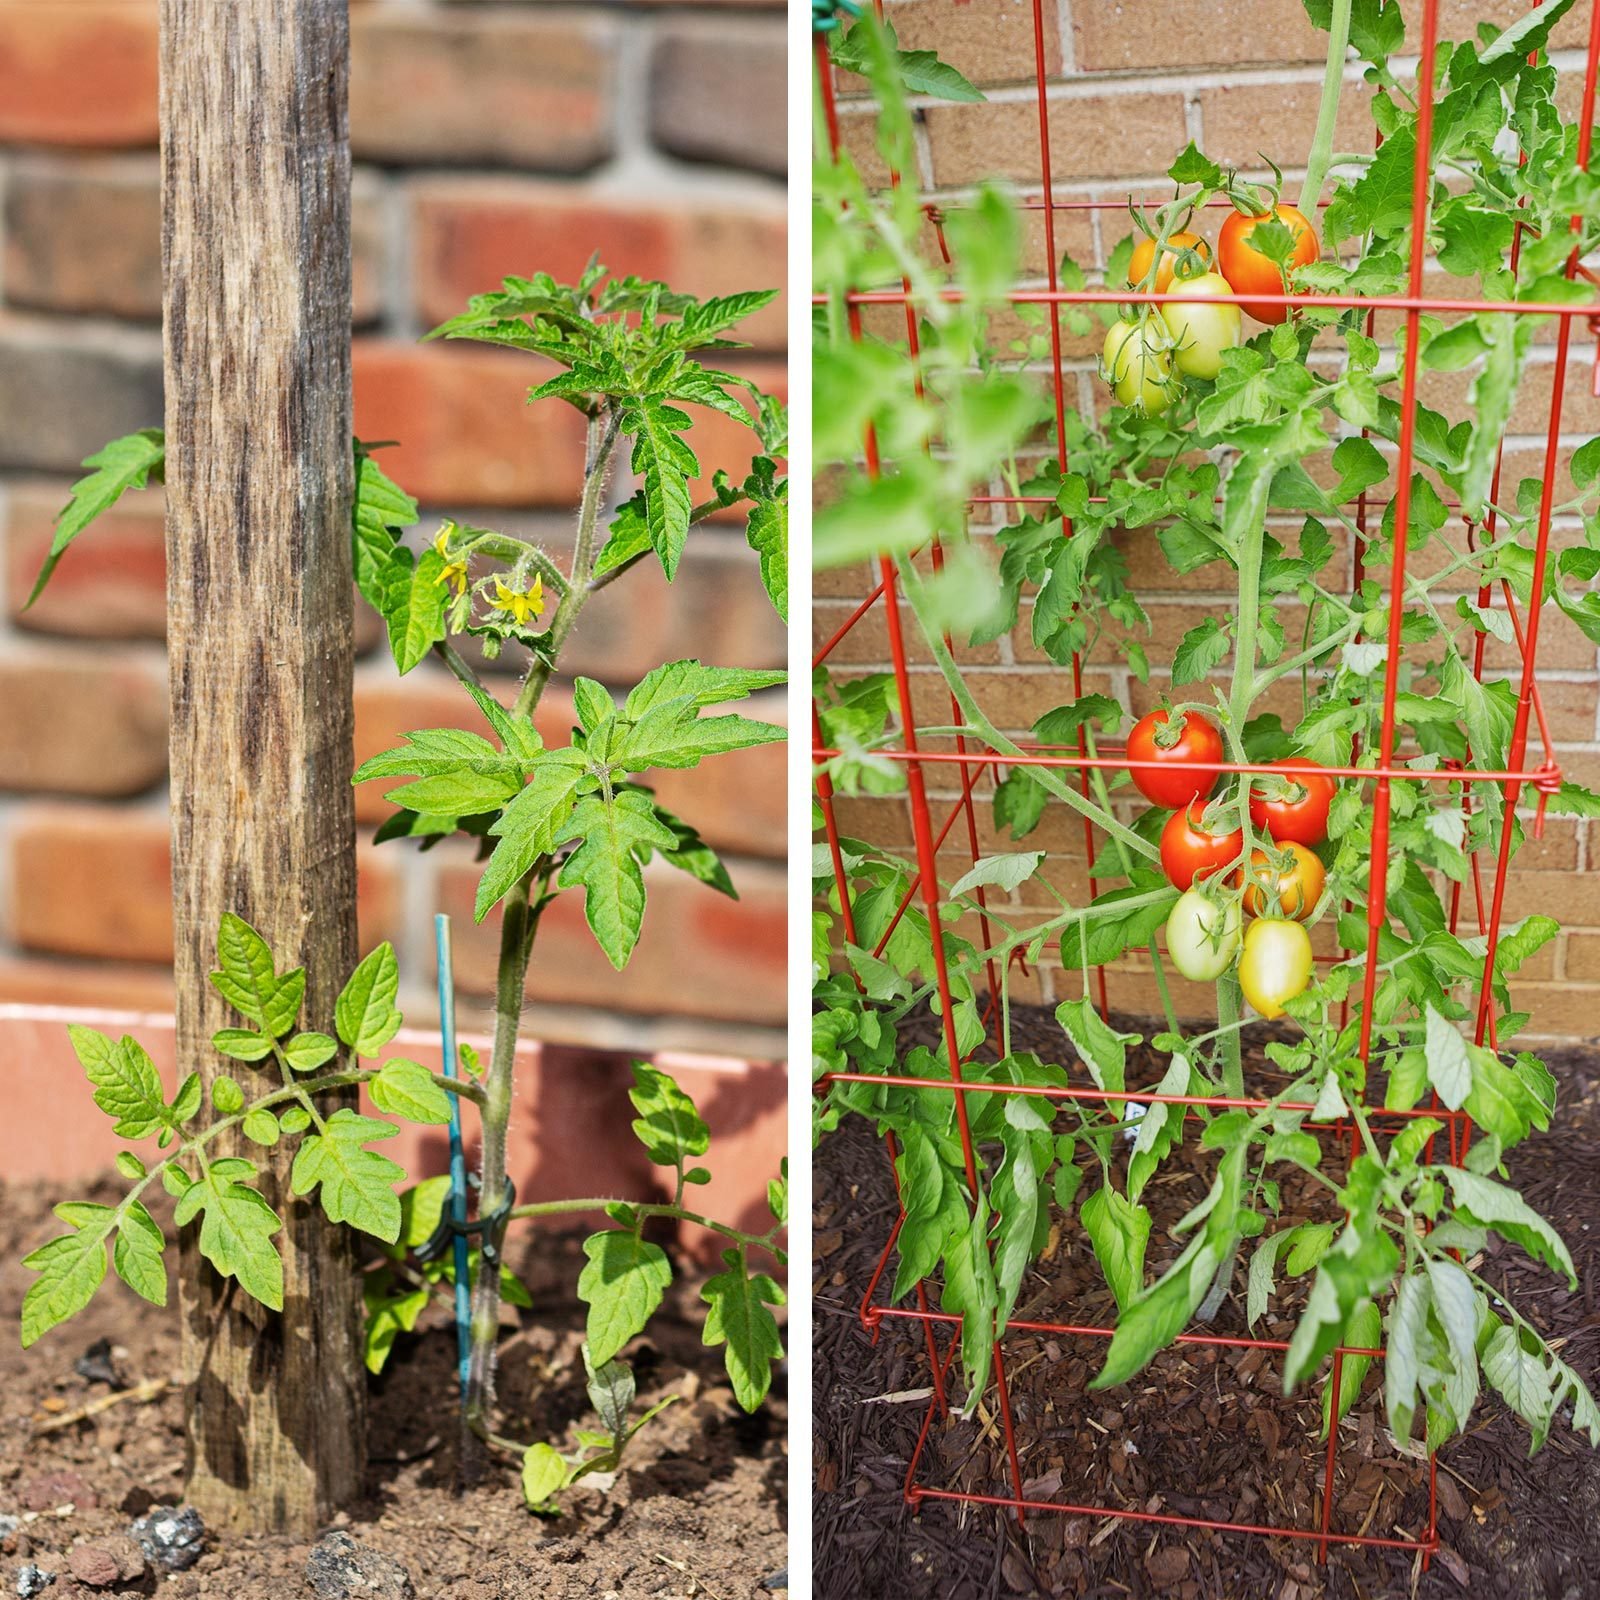 Do My Tomato Plants Need To Be Staked or Caged?